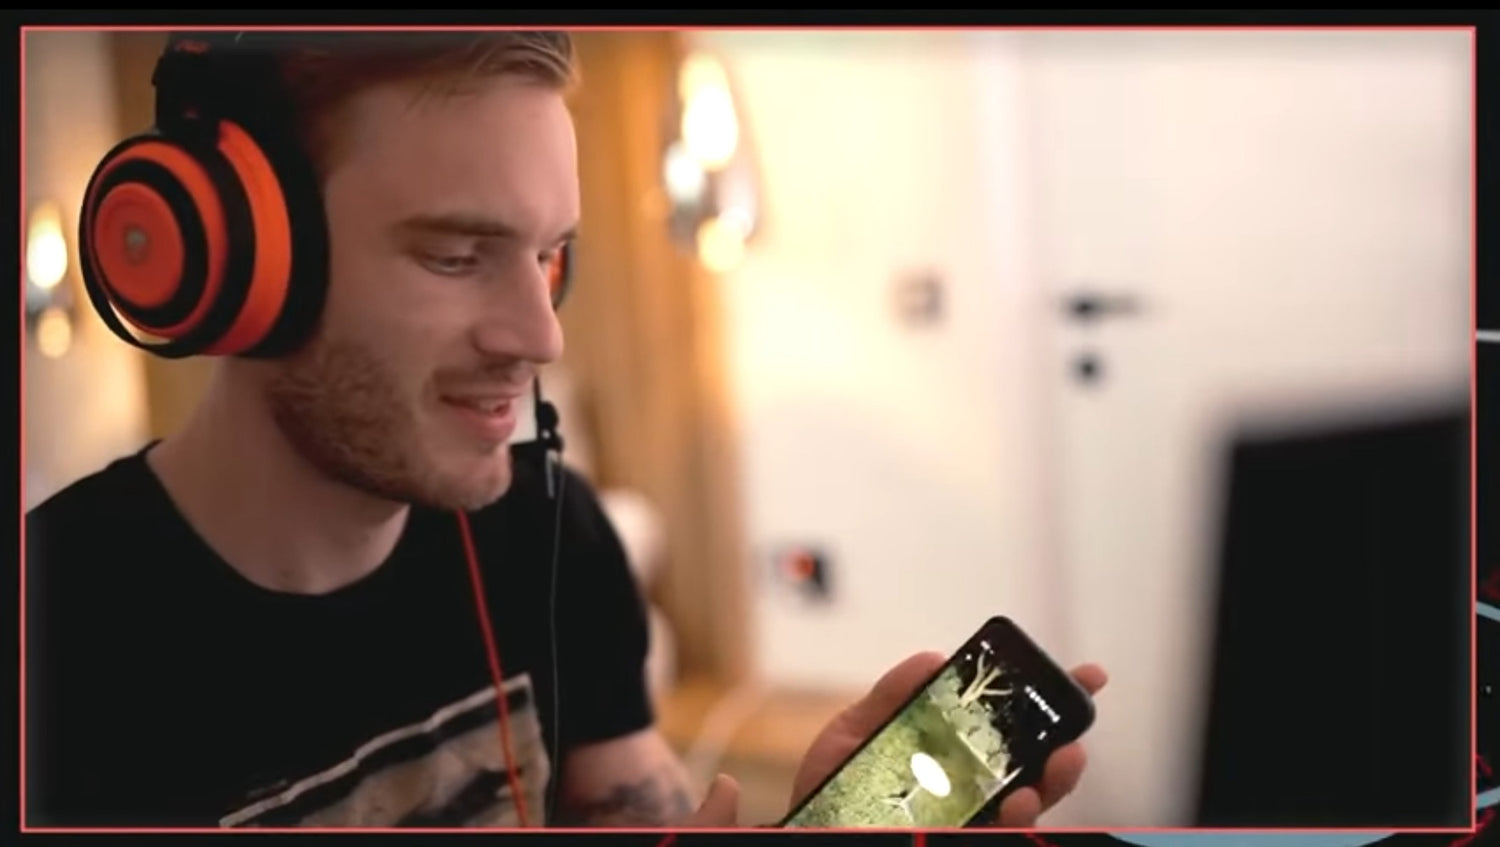 YouTuber PewDiePie Shares He Is Using SpaceX's Starlink Internet –‘You literally just plug it in & Bam! you got internet!’